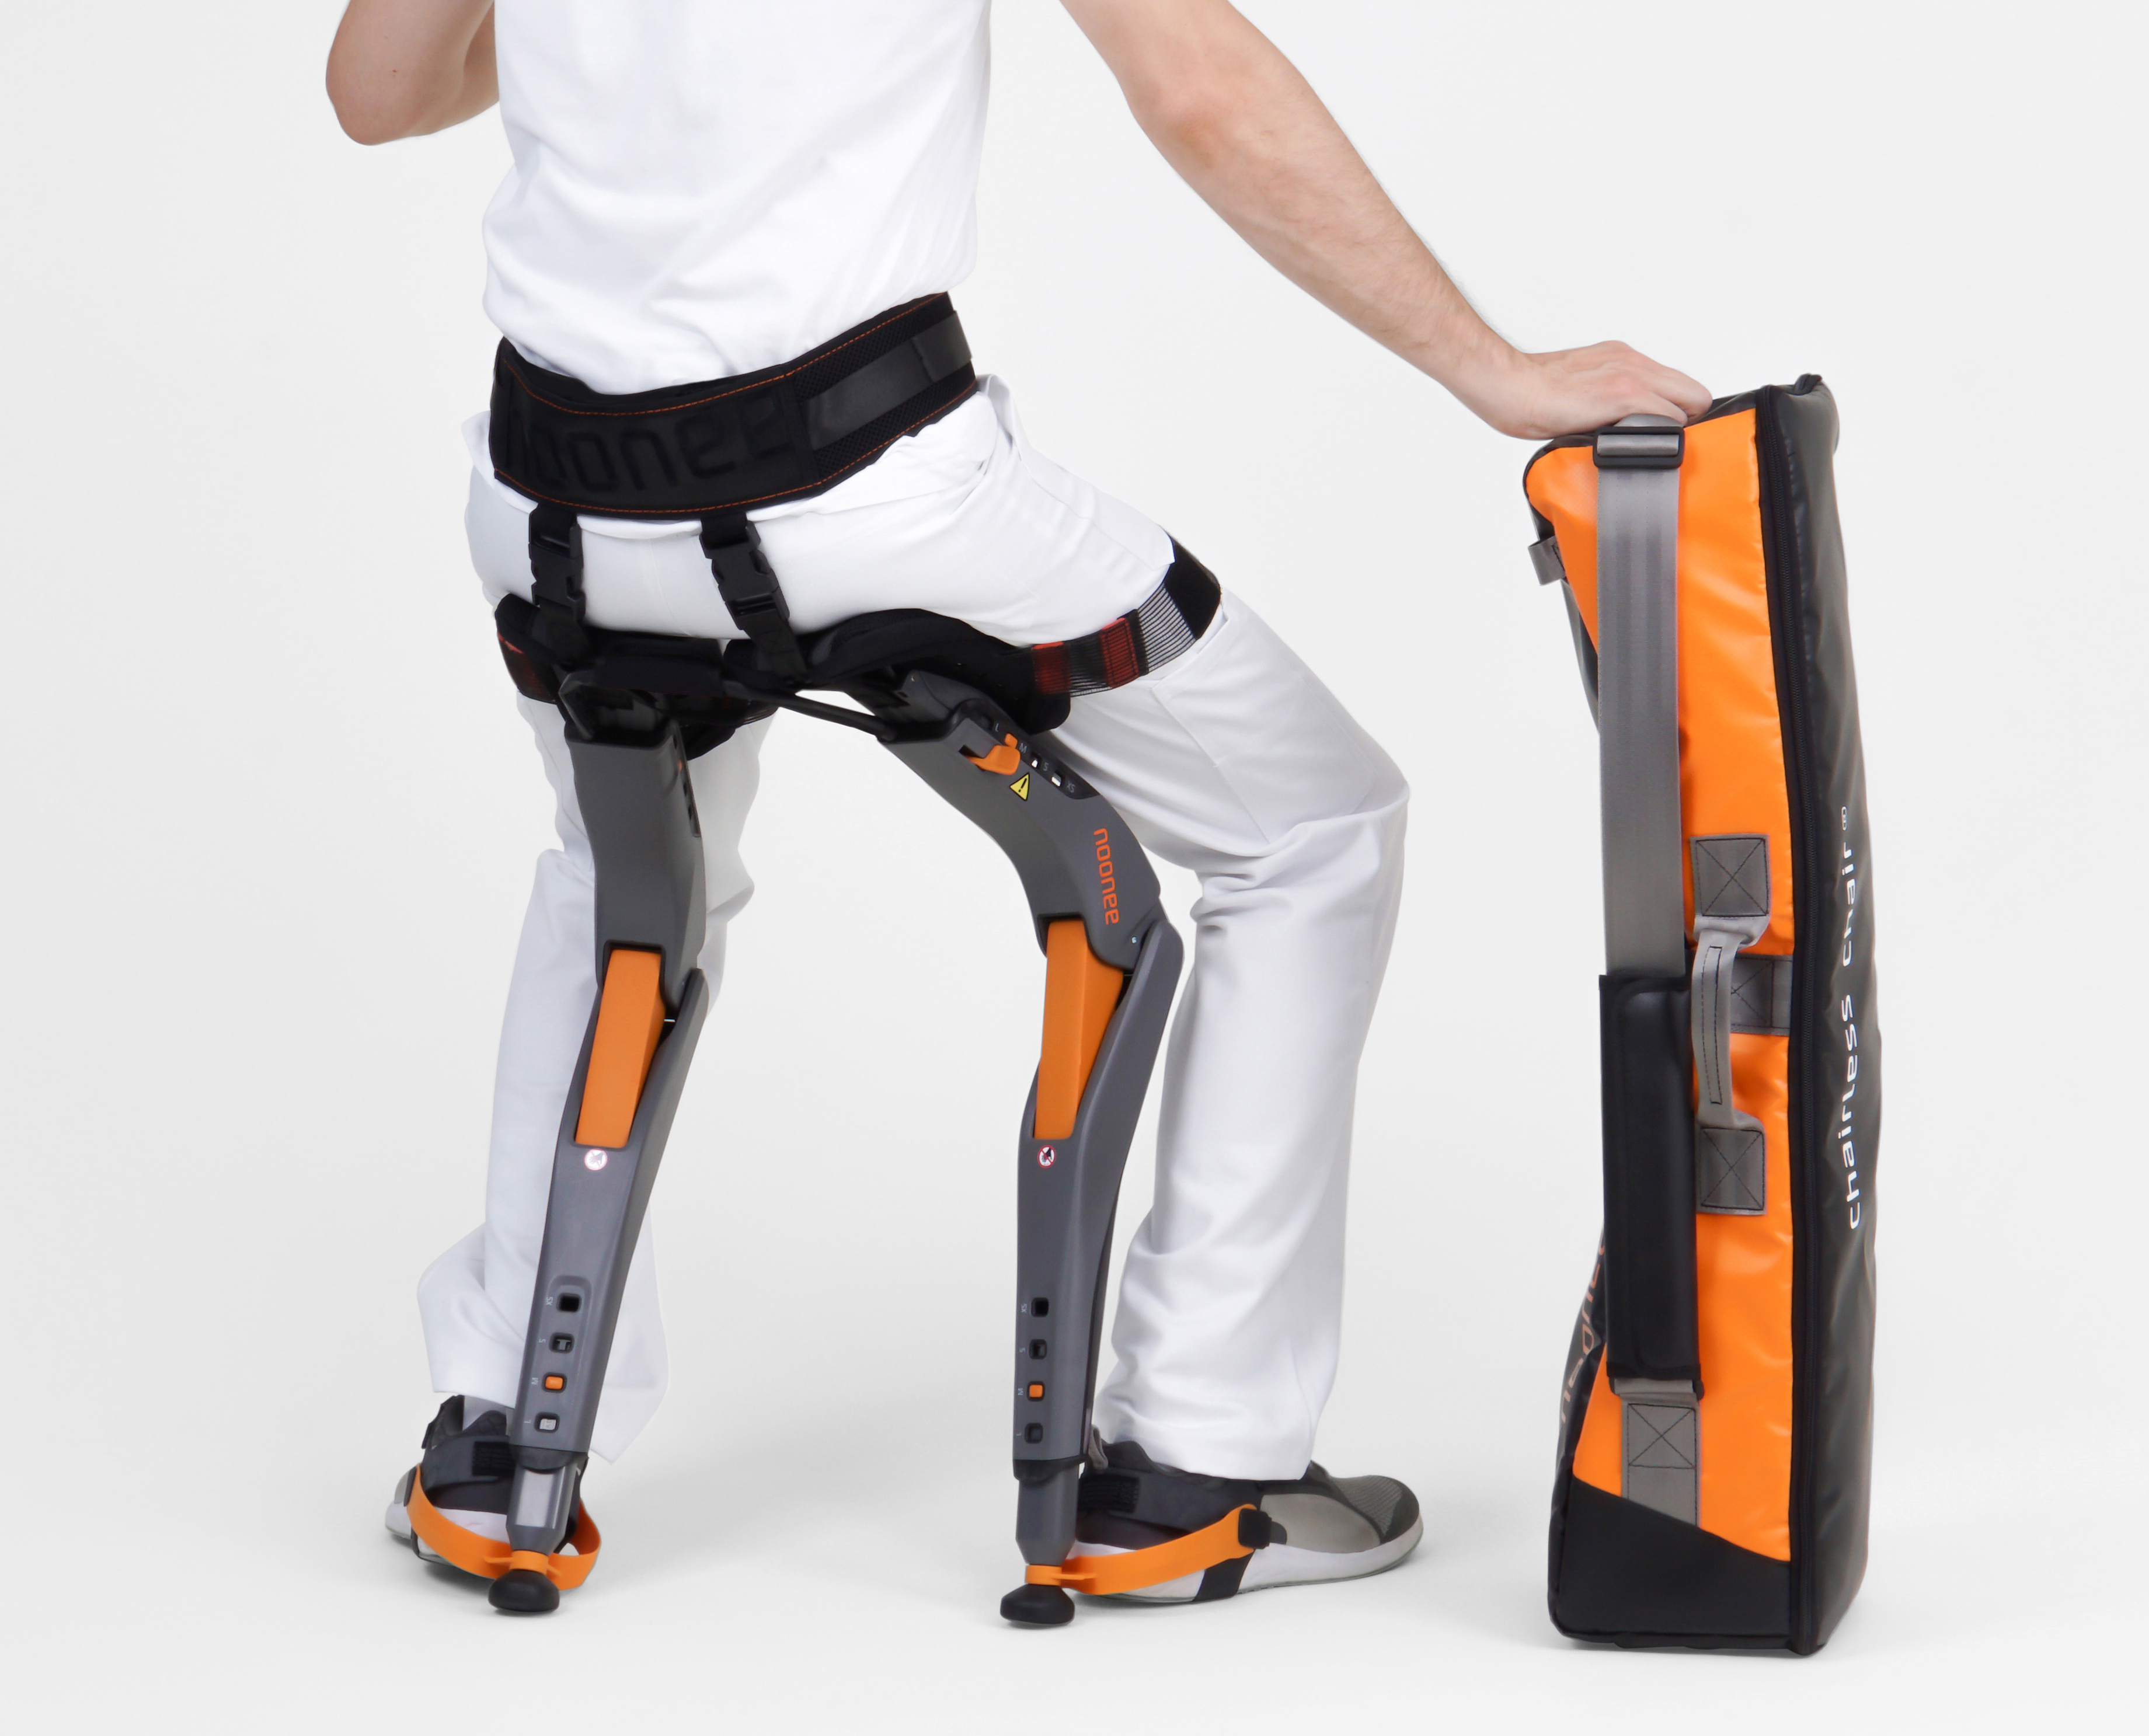 Chairless Chair A Wearable Device That Will Let You Sit Anywhere You Want The Irish News